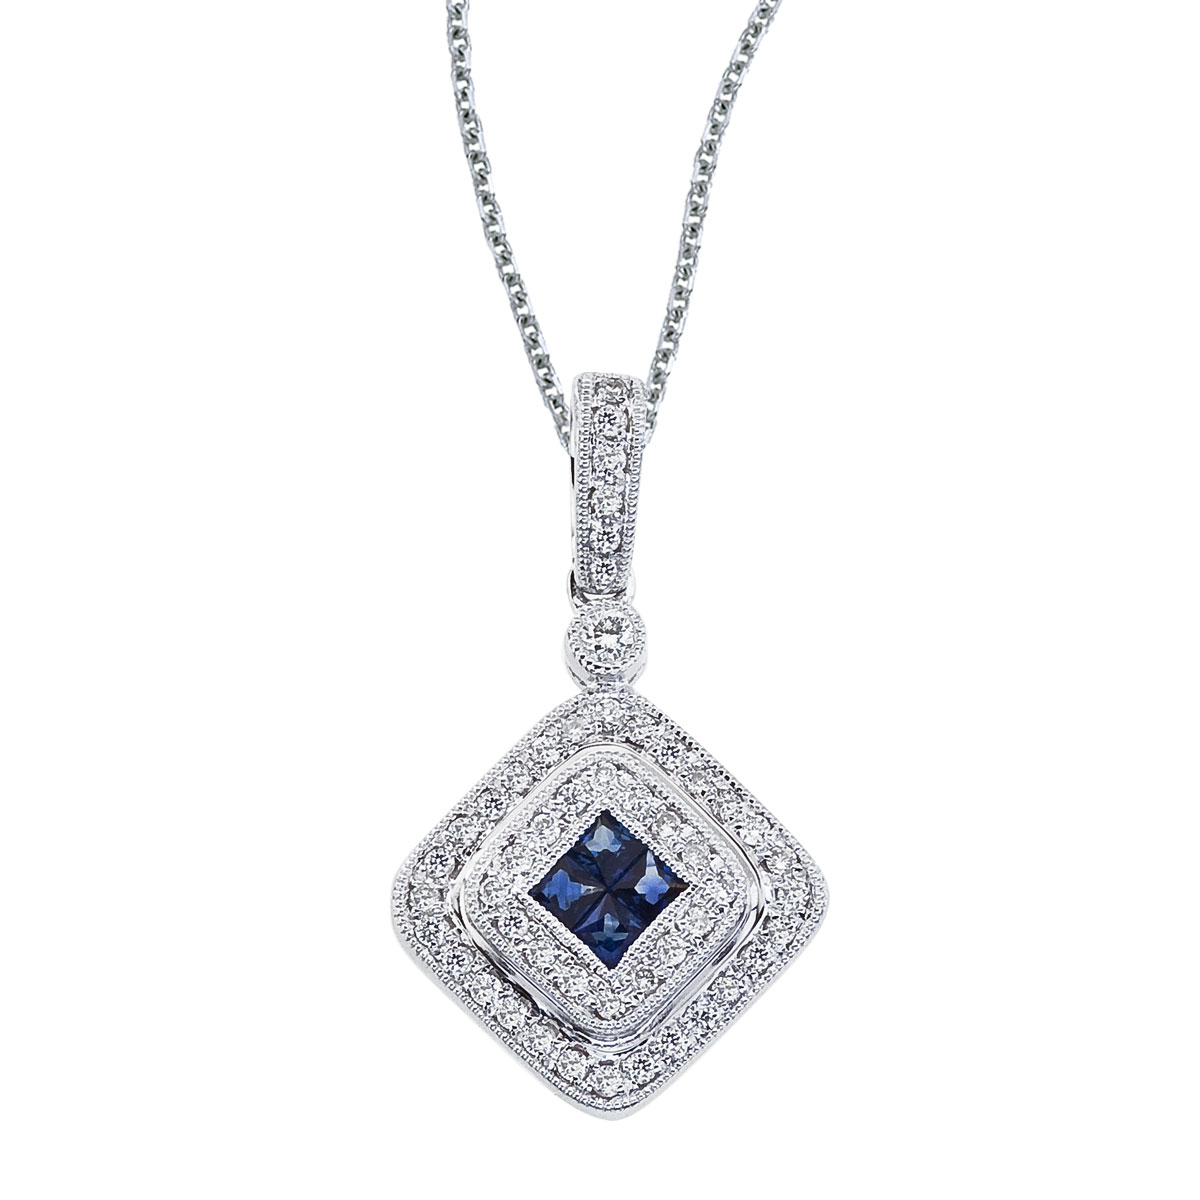 JCX2557: This fashionable pendant features four 1.6 mm sapphires and .17 total carats of sparkling diamonds.